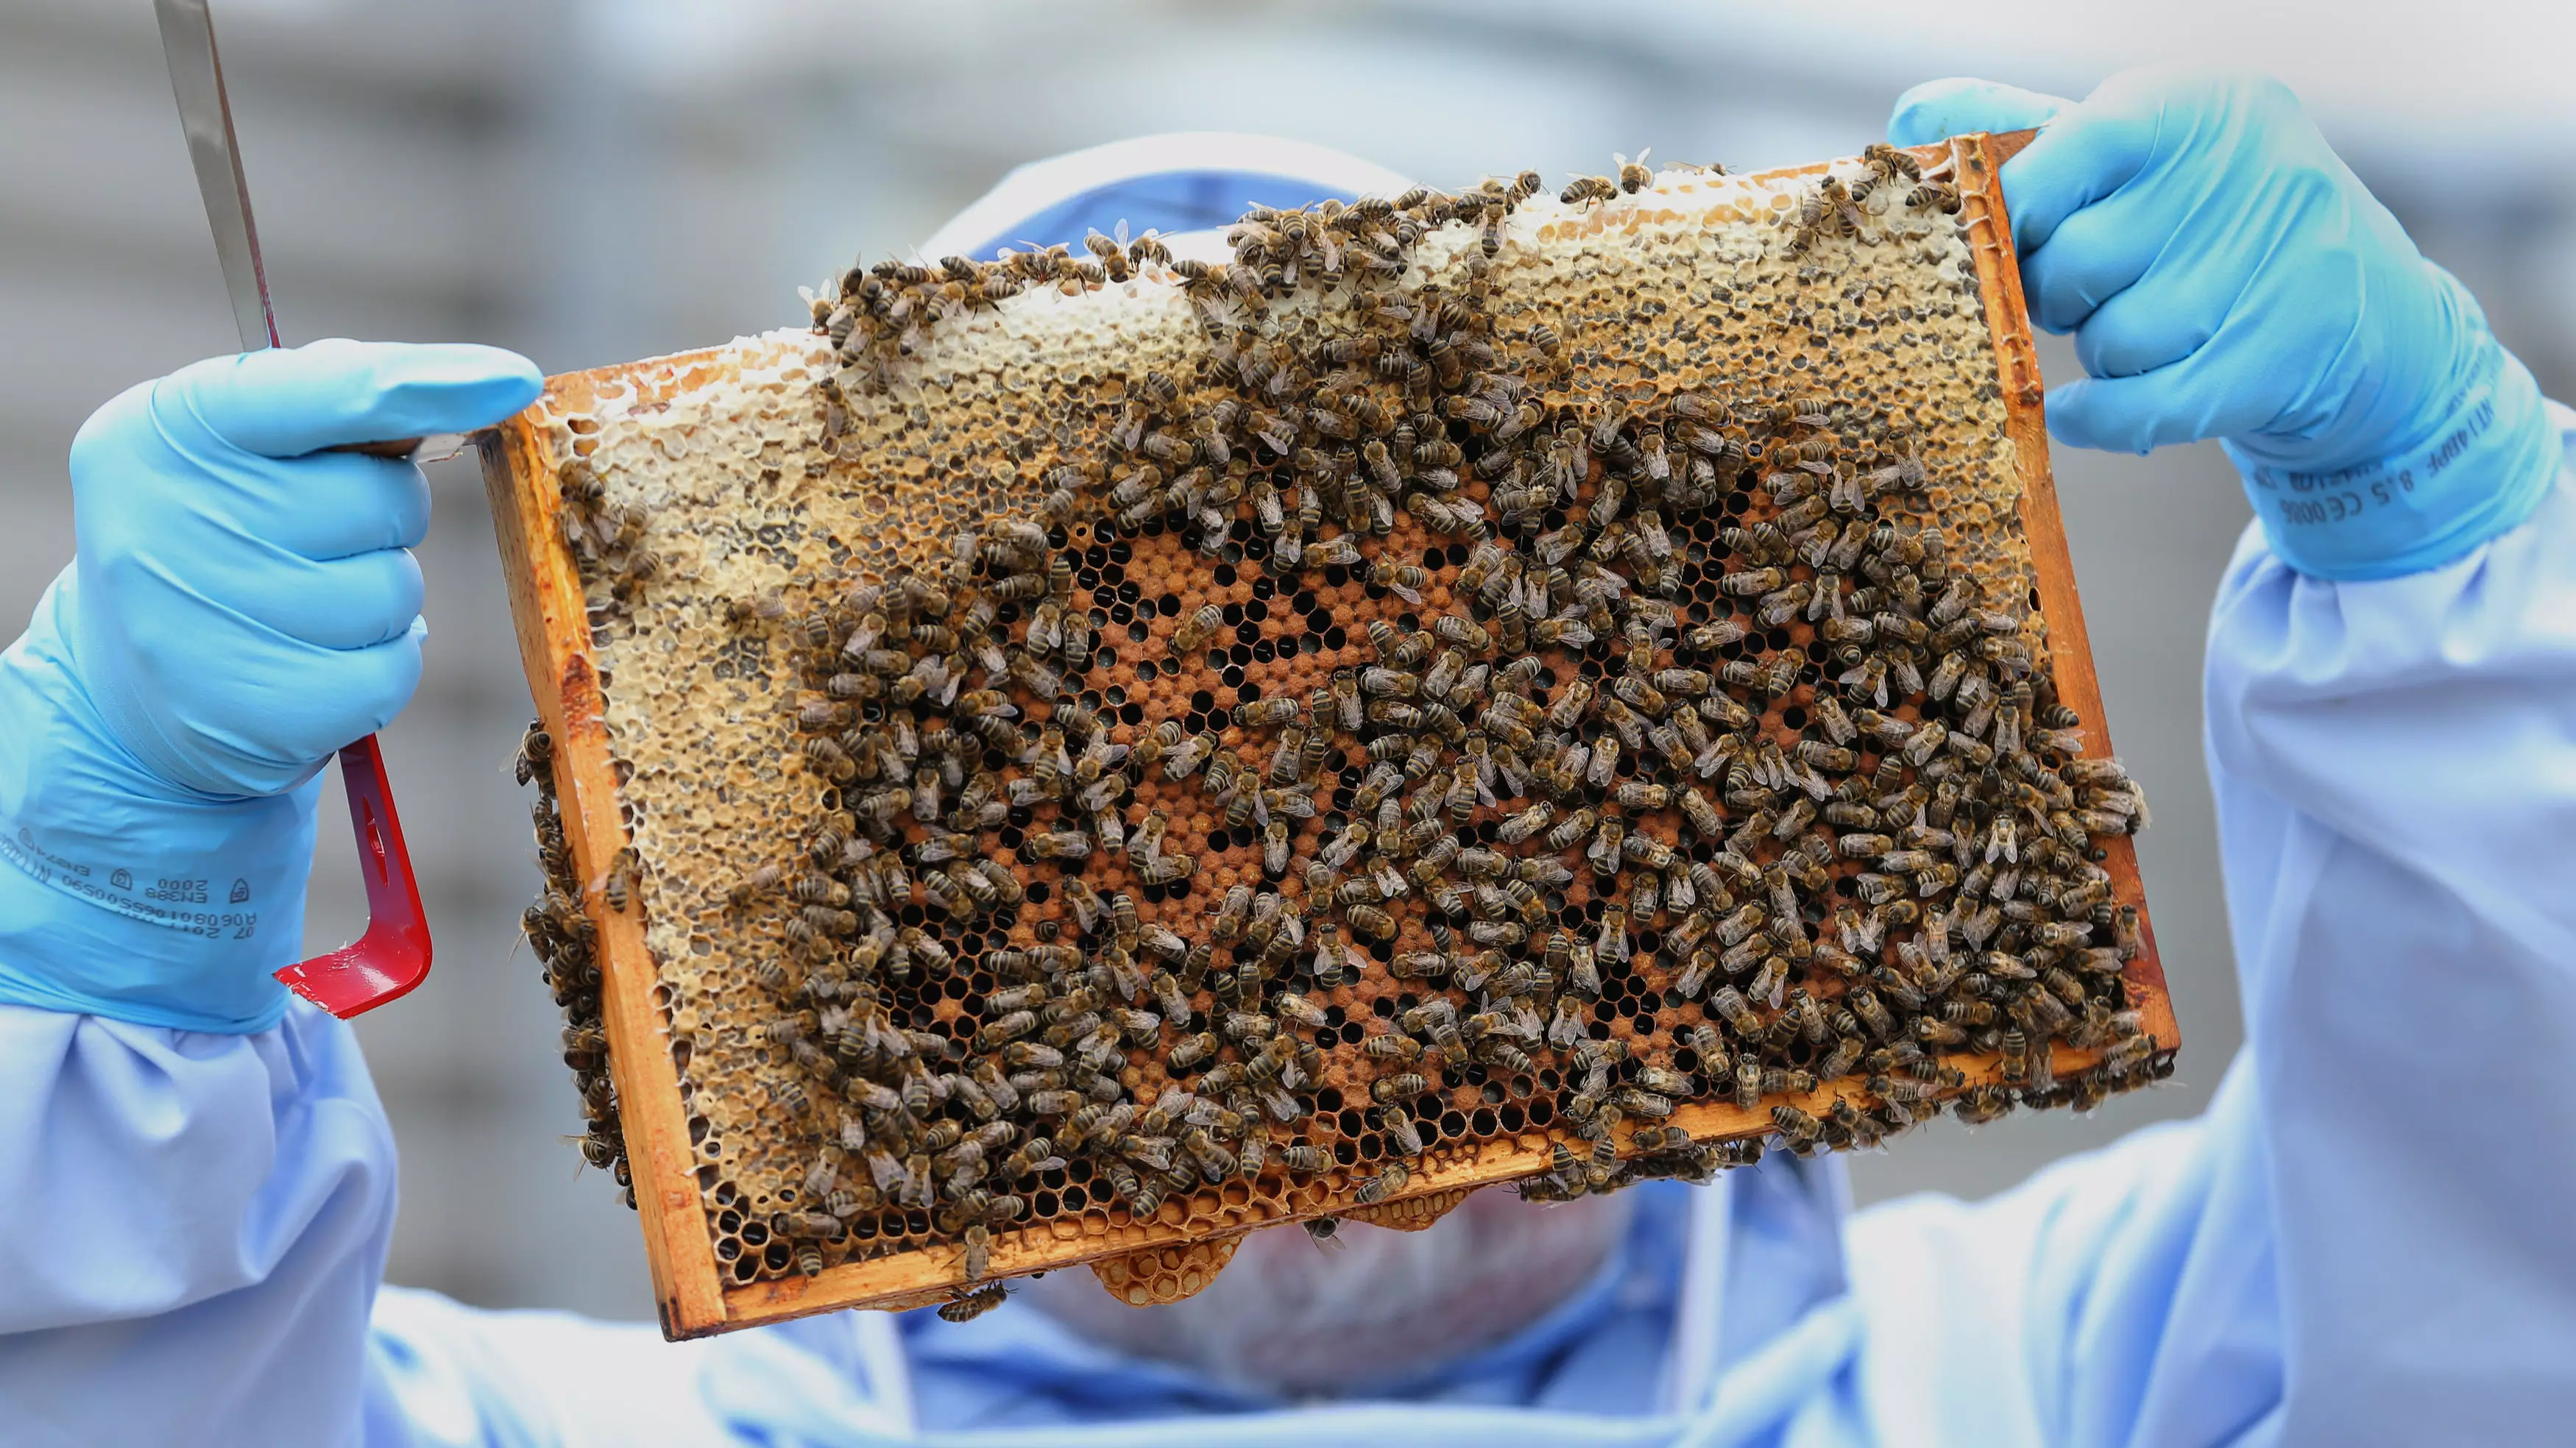 Two Boys Could Face 10 Years Behind Bars For Allegedly Killing Half A Million Bees